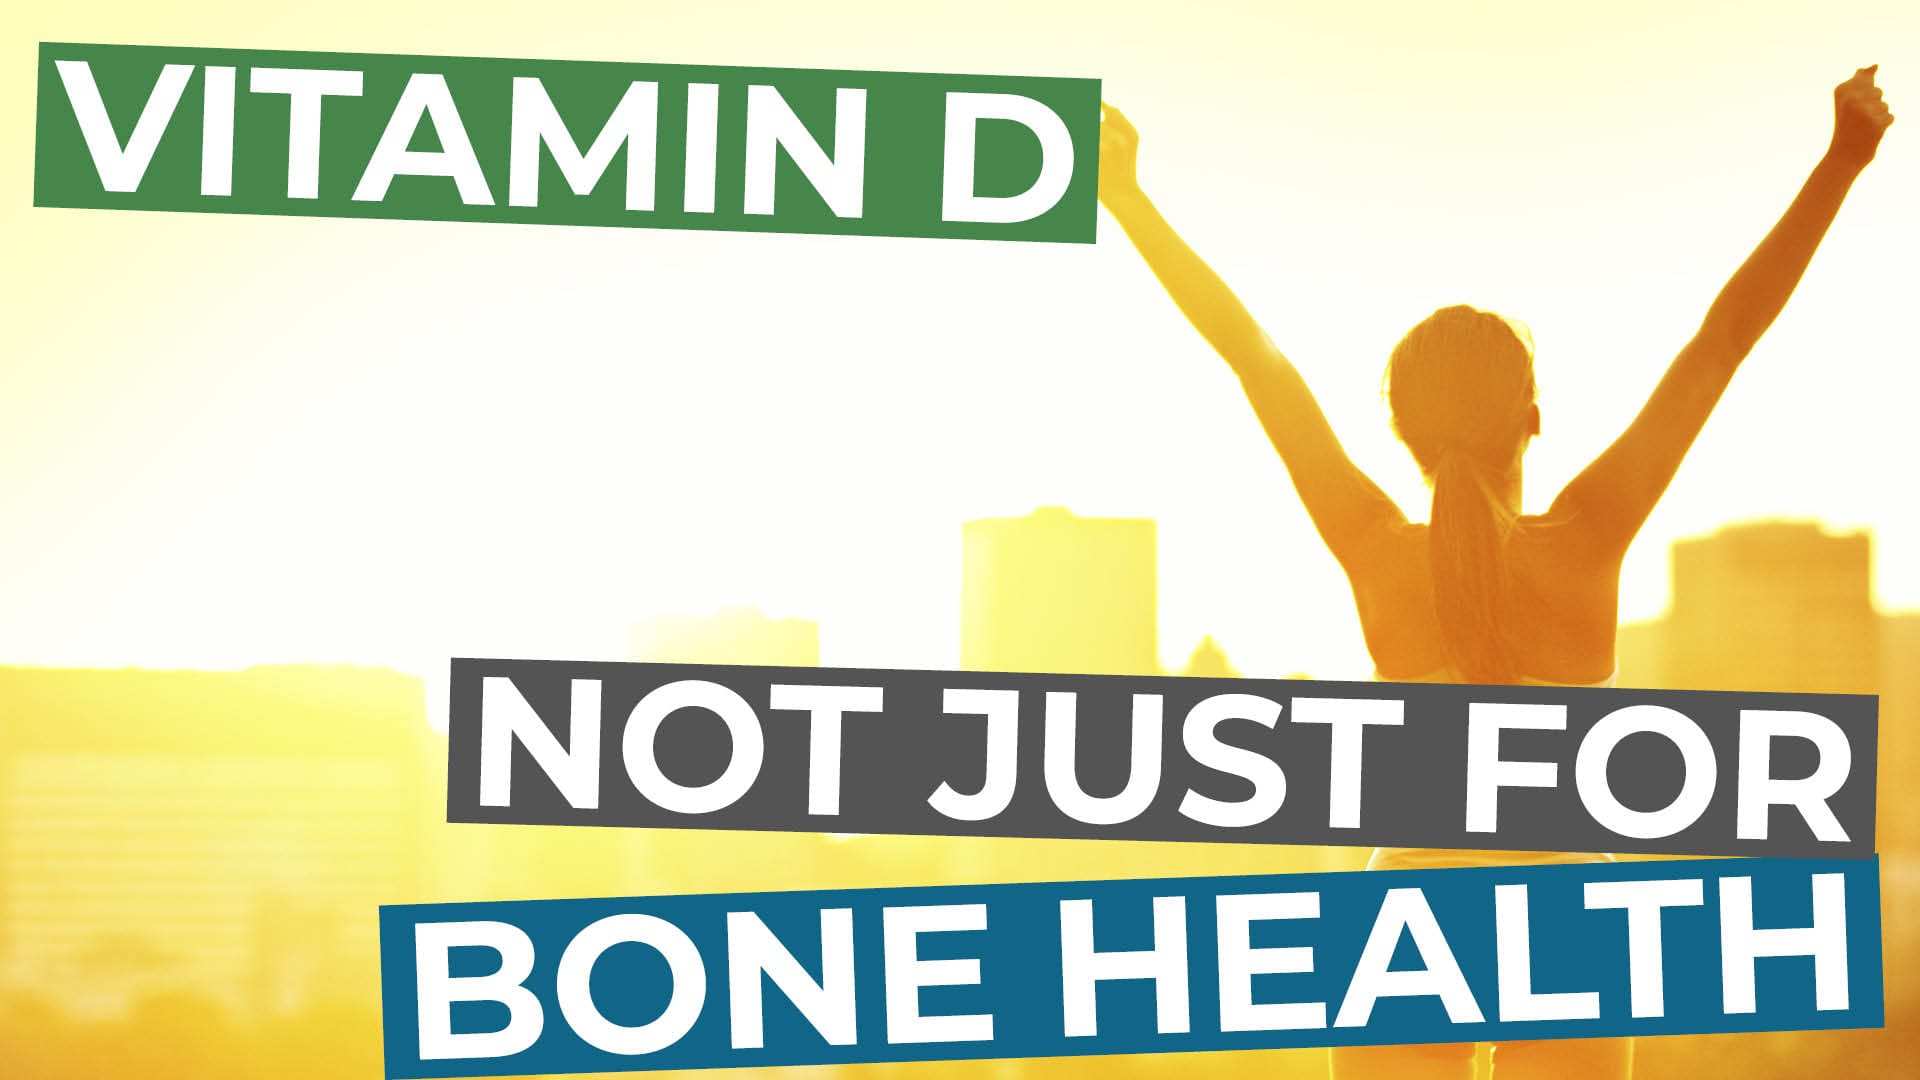 012 – Vitamin D: Not Just For Bone Health